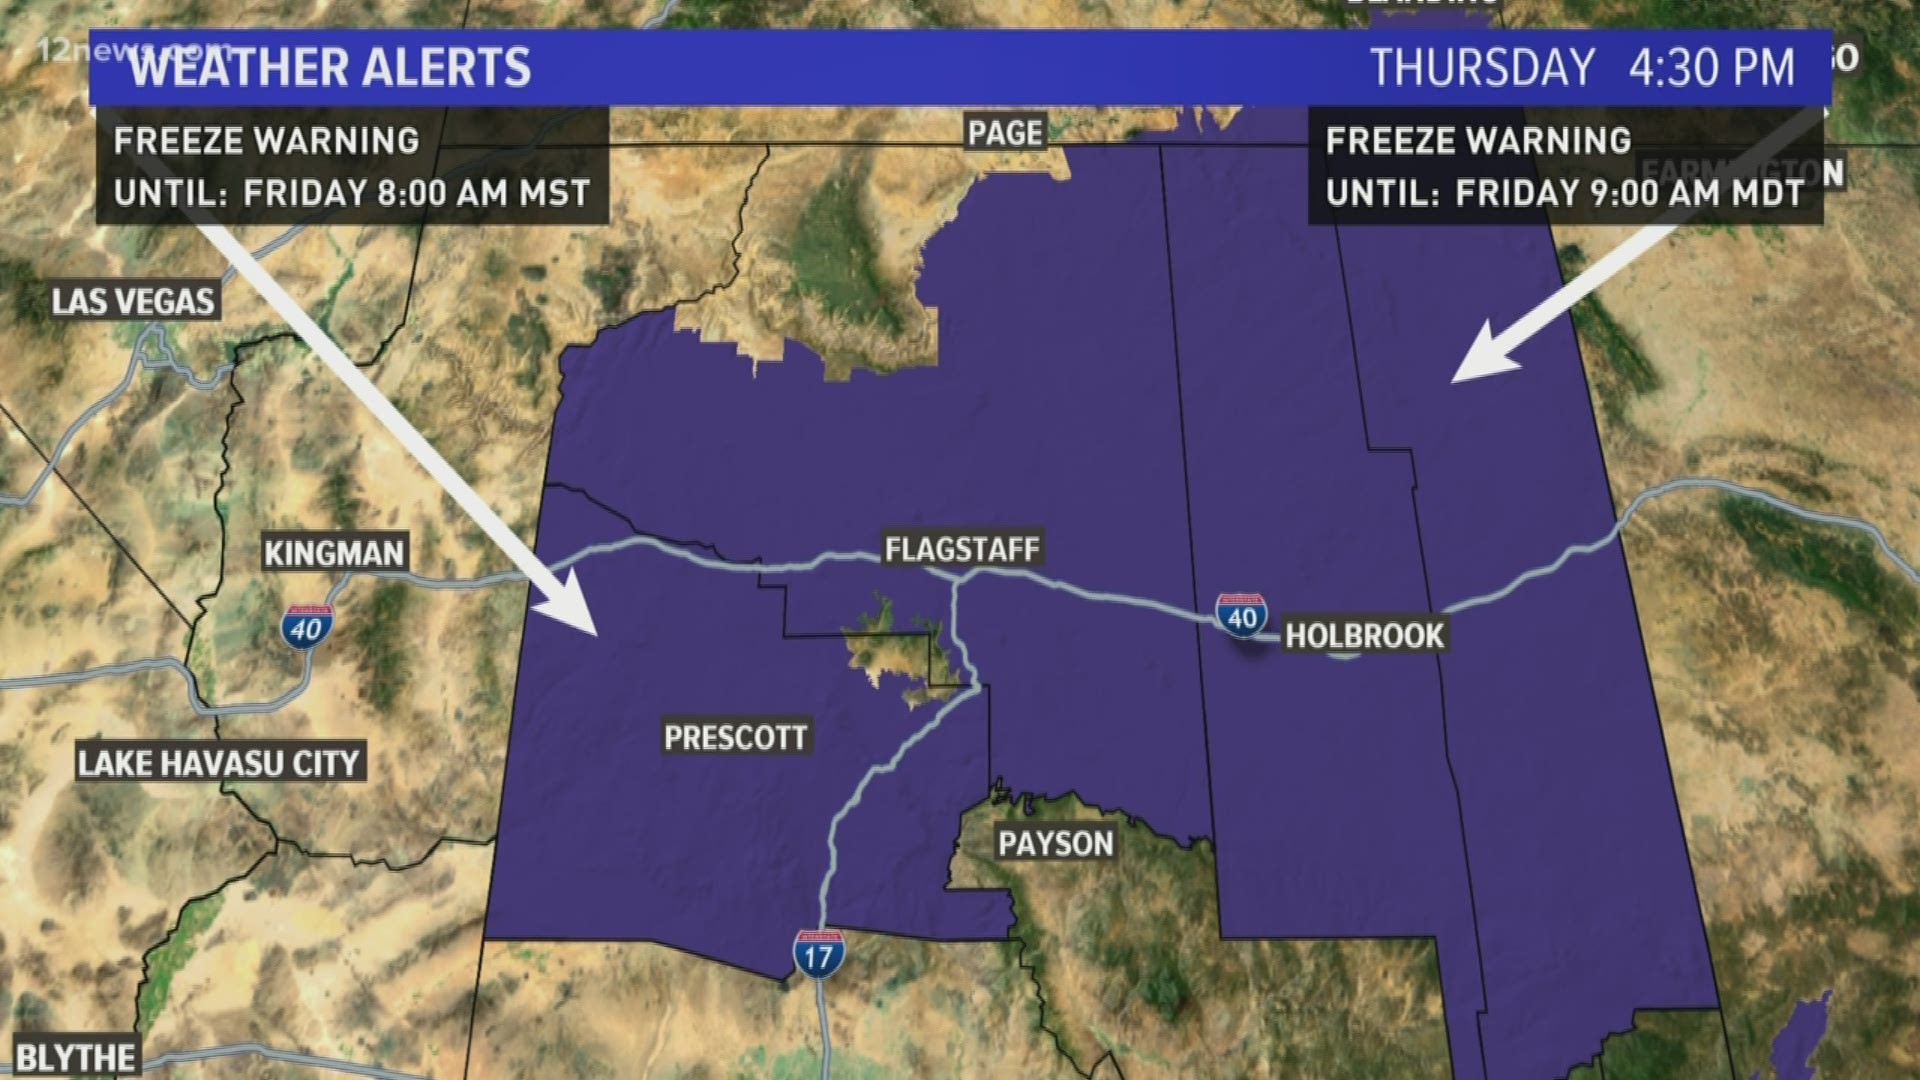 Lows in Northern Arizona will be VERY low Thursday evening. There's a freeze warning in effect for the northern portion of the state.